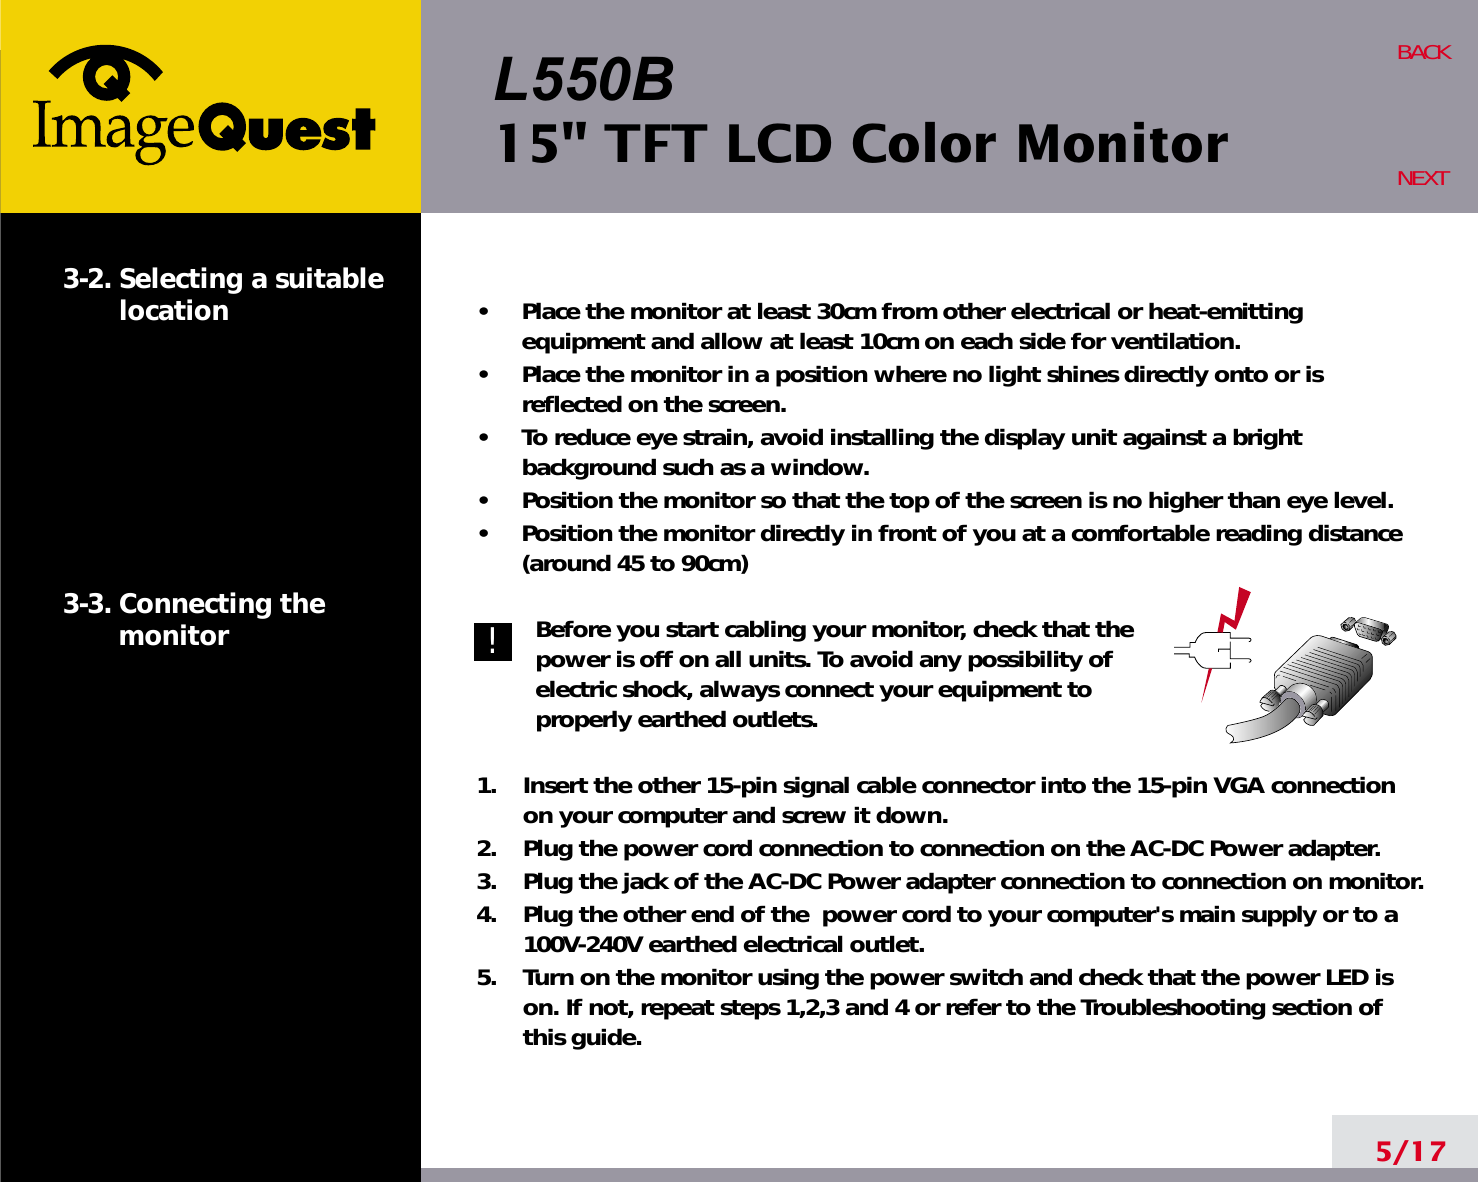 L550B15&quot; TFT LCD Color Monitor5/17BACKNEXT3-2. Selecting a suitablelocation3-3. Connecting the monitor•     Place the monitor at least 30cm from other electrical or heat-emittingequipment and allow at least 10cm on each side for ventilation.•     Place the monitor in a position where no light shines directly onto or isreflected on the screen.•     To reduce eye strain, avoid installing the display unit against a brightbackground such as a window.•     Position the monitor so that the top of the screen is no higher than eye level.•     Position the monitor directly in front of you at a comfortable reading distance(around 45 to 90cm) Before you start cabling your monitor, check that thepower is off on all units. To avoid any possibility ofelectric shock, always connect your equipment toproperly earthed outlets.1.    Insert the other 15-pin signal cable connector into the 15-pin VGA connectionon your computer and screw it down. 2.    Plug the power cord connection to connection on the AC-DC Power adapter.3.    Plug the jack of the AC-DC Power adapter connection to connection on monitor.4.    Plug the other end of the  power cord to your computer&apos;s main supply or to a100V-240V earthed electrical outlet.5.    Turn on the monitor using the power switch and check that the power LED ison. If not, repeat steps 1,2,3 and 4 or refer to the Troubleshooting section ofthis guide.!!